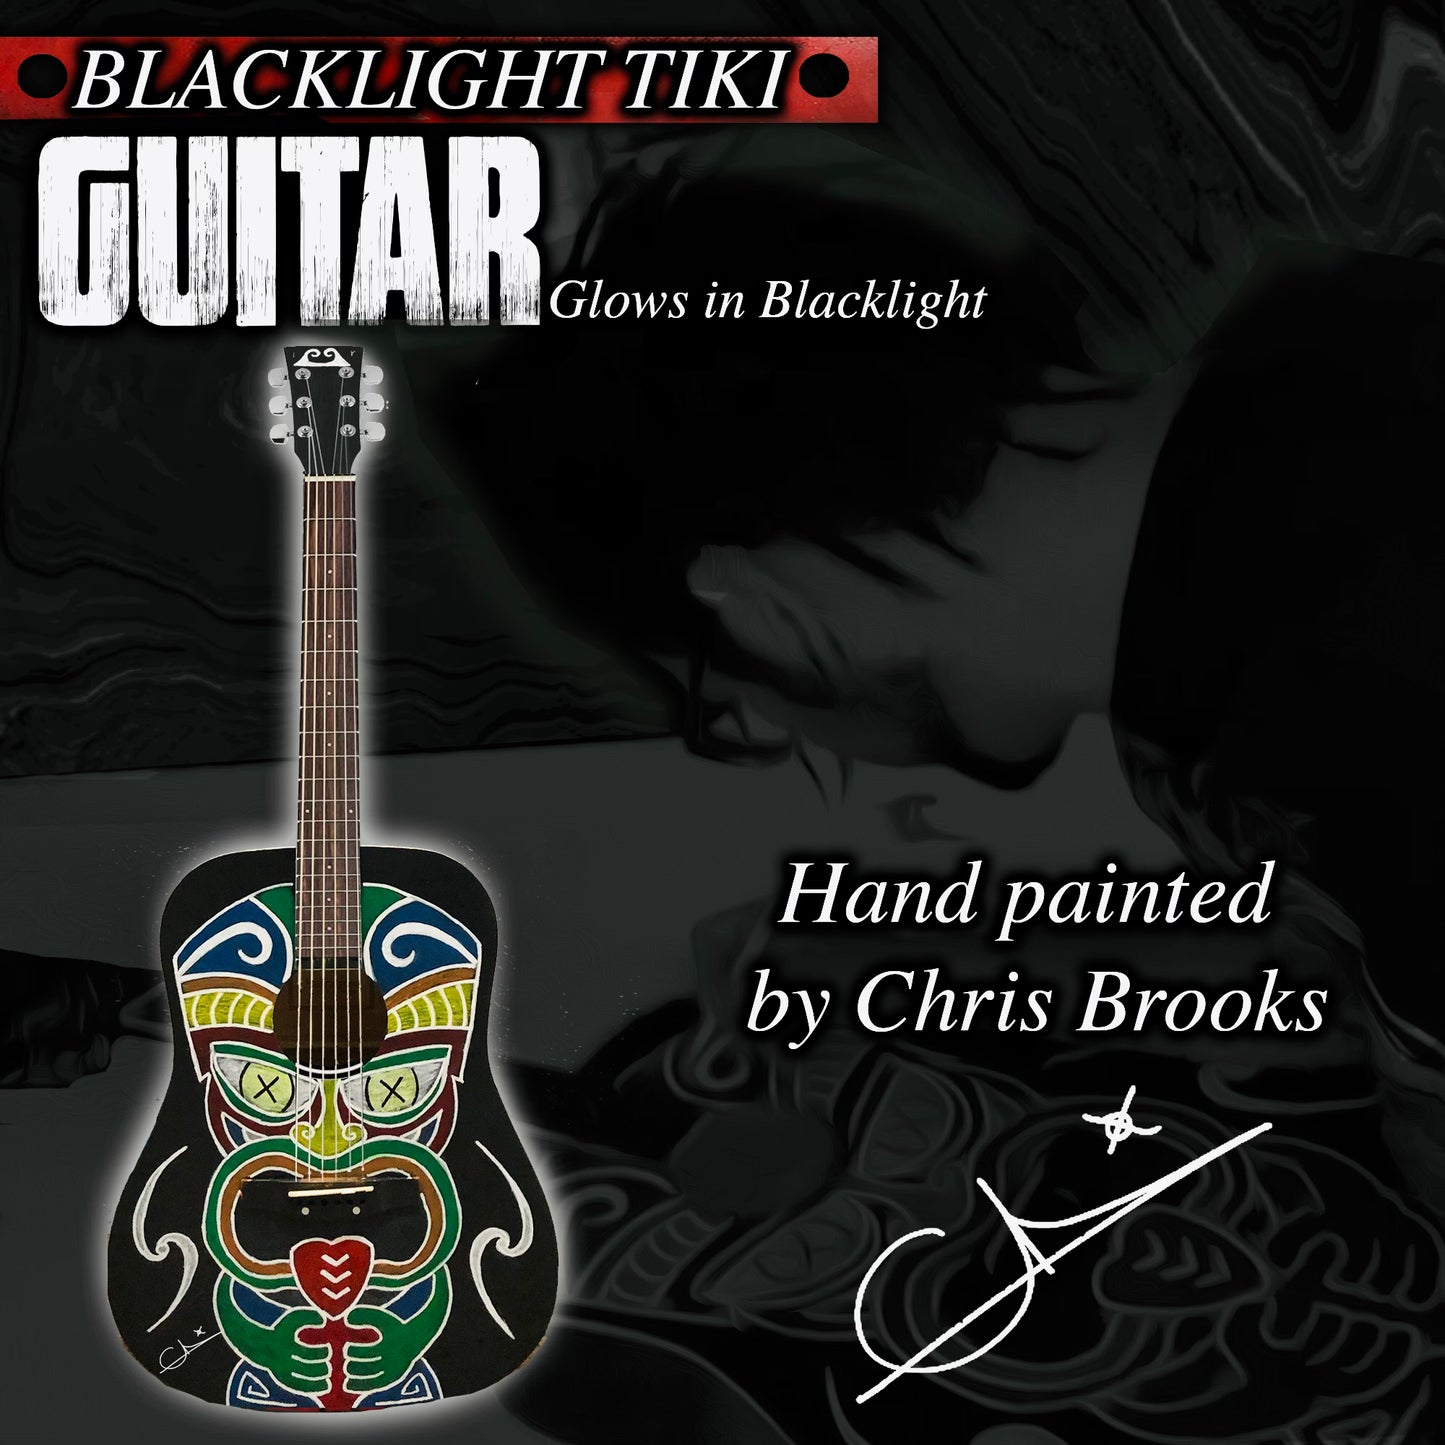 HAND-PAINTED GUITAR - Blacklight Tiki | Painted & Signed by Chris Brooks